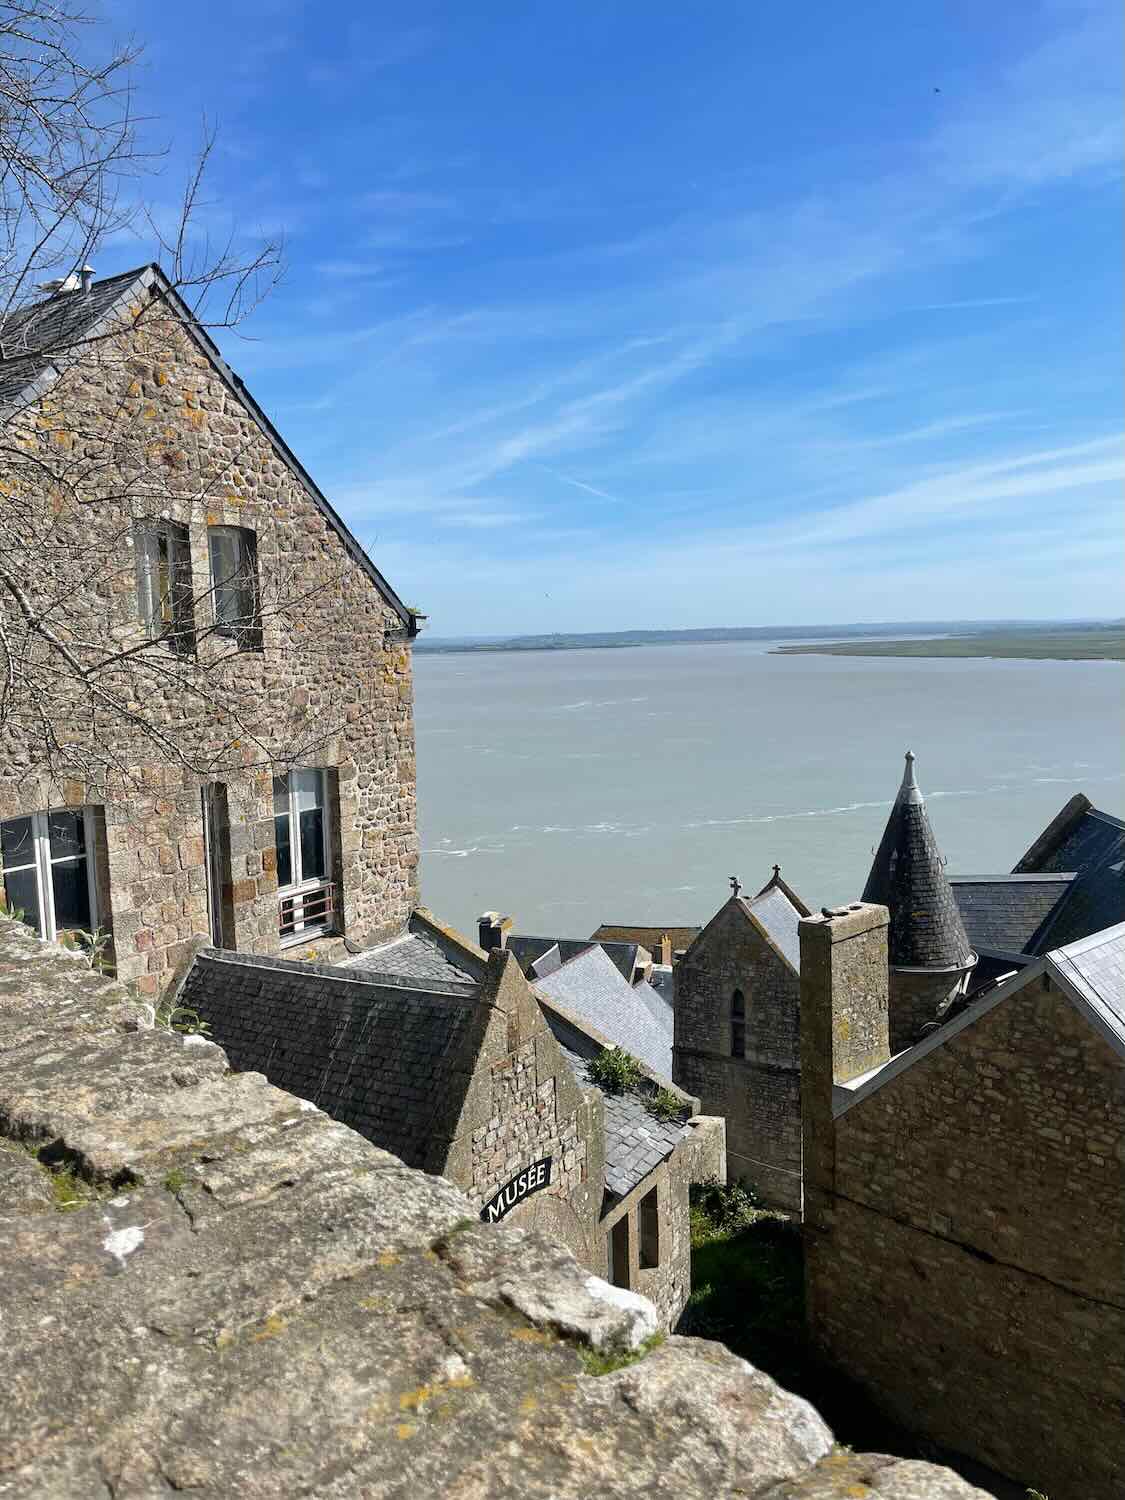 A picturesque view over the rooftops of Mont Saint Michel, looking out to the expansive bay under a clear sky, with historical buildings densely packed together.